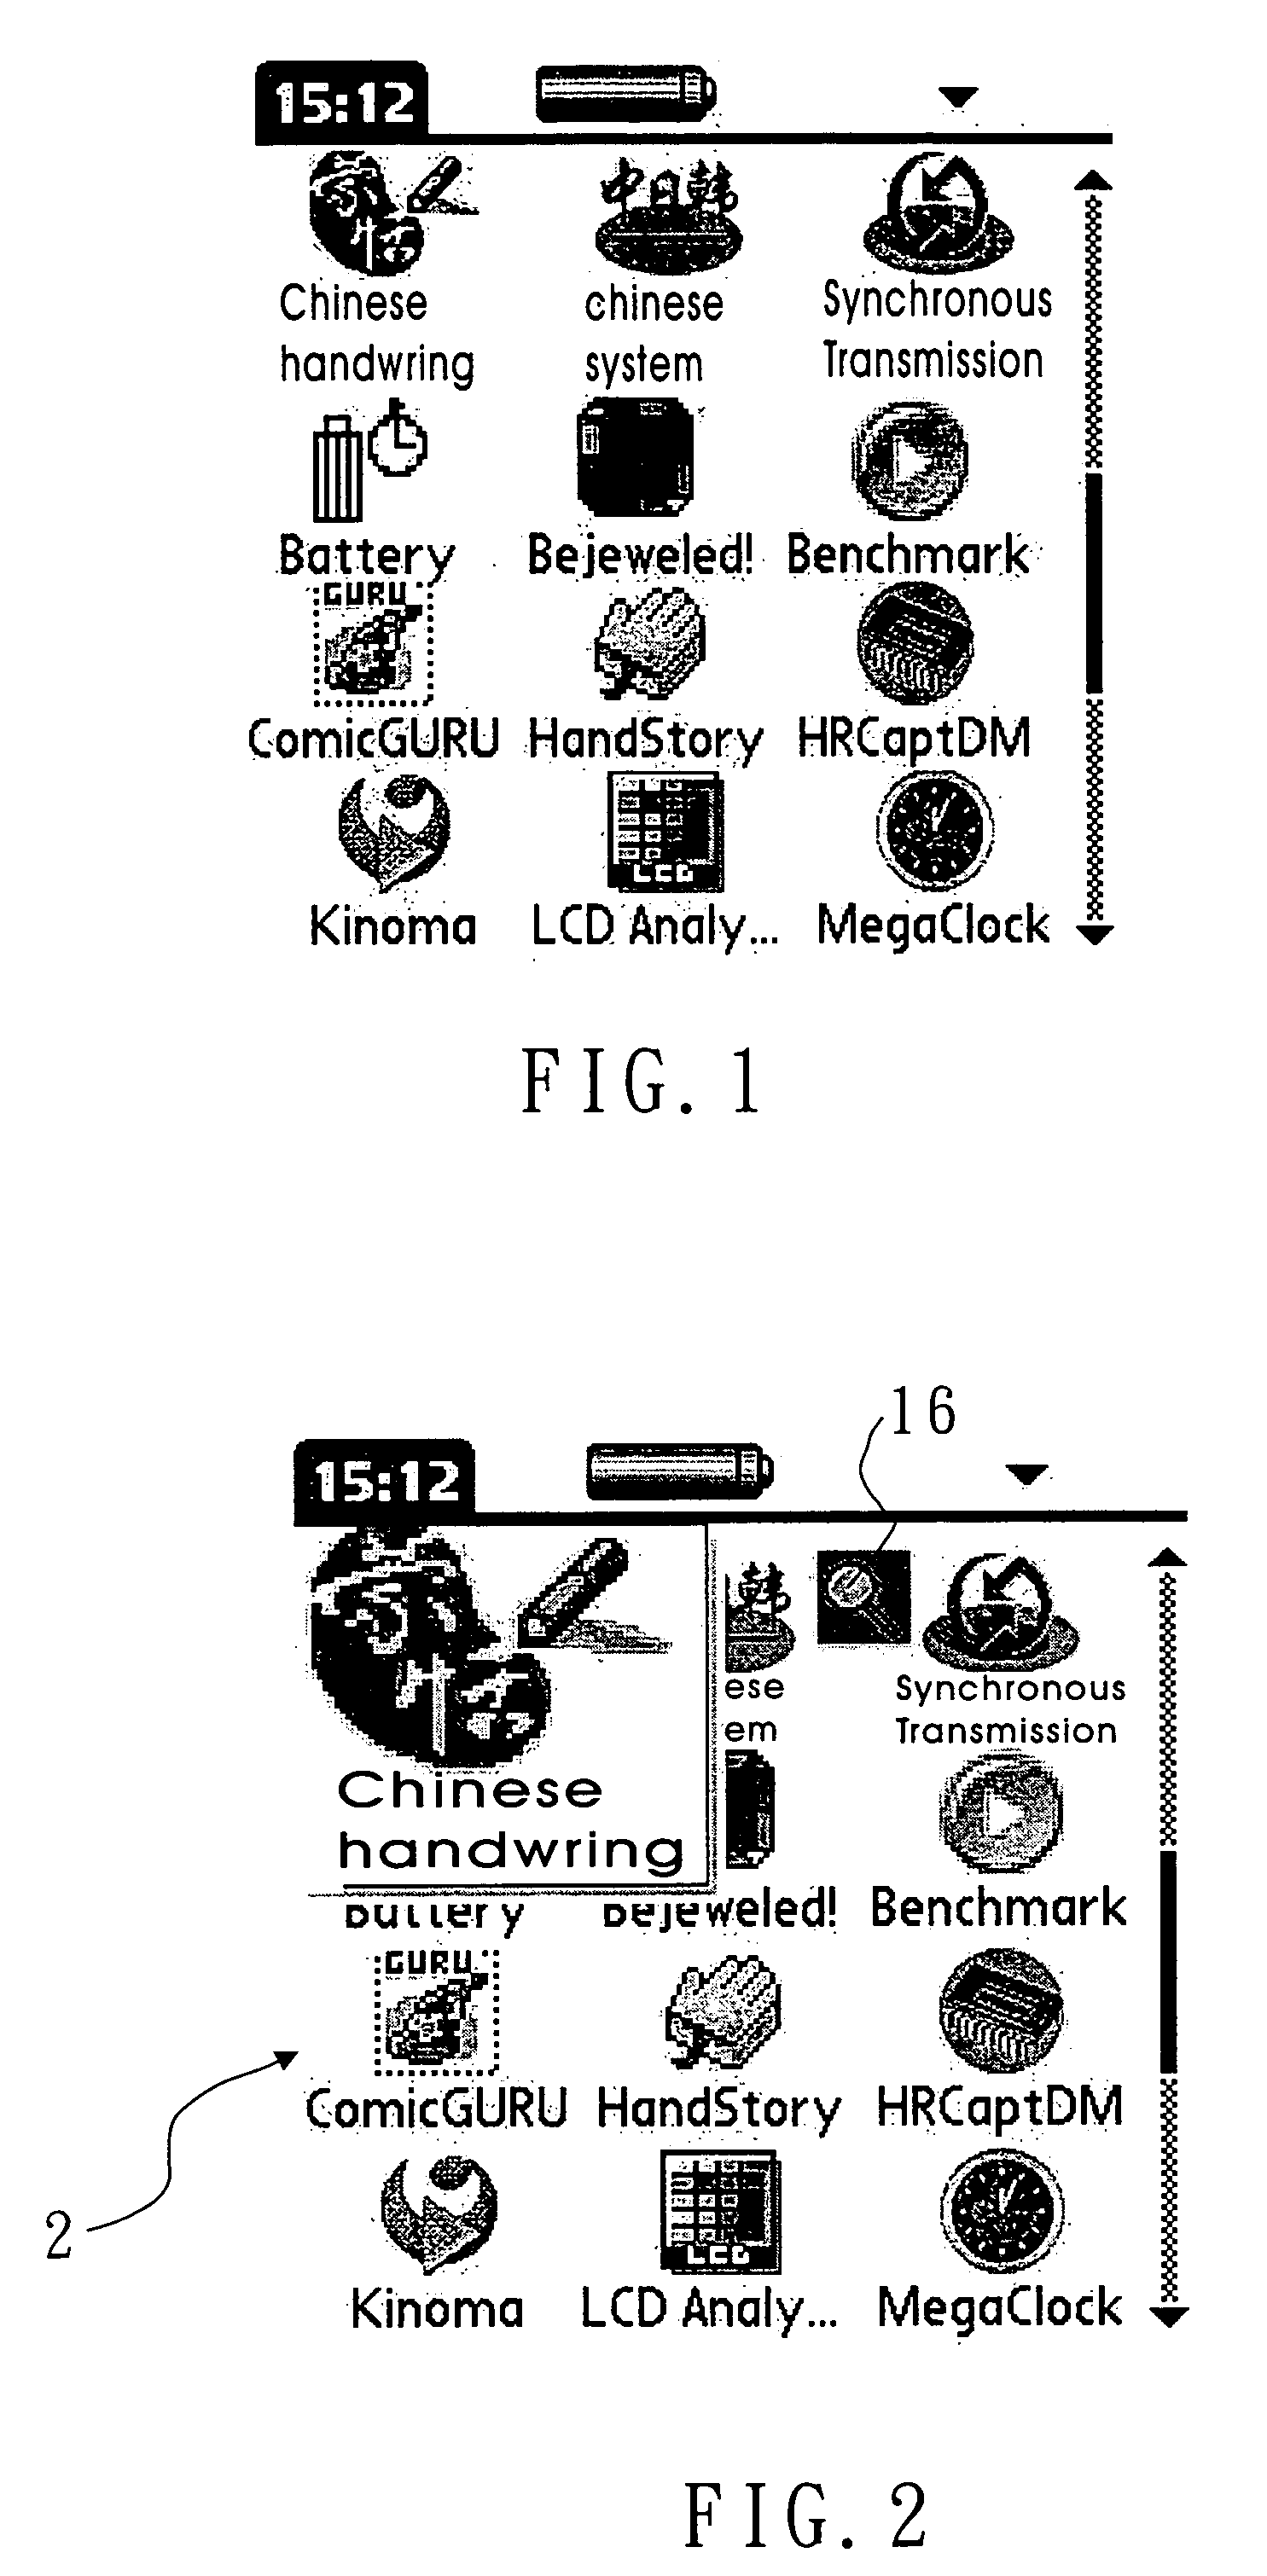 Method of magnifying a portion of display